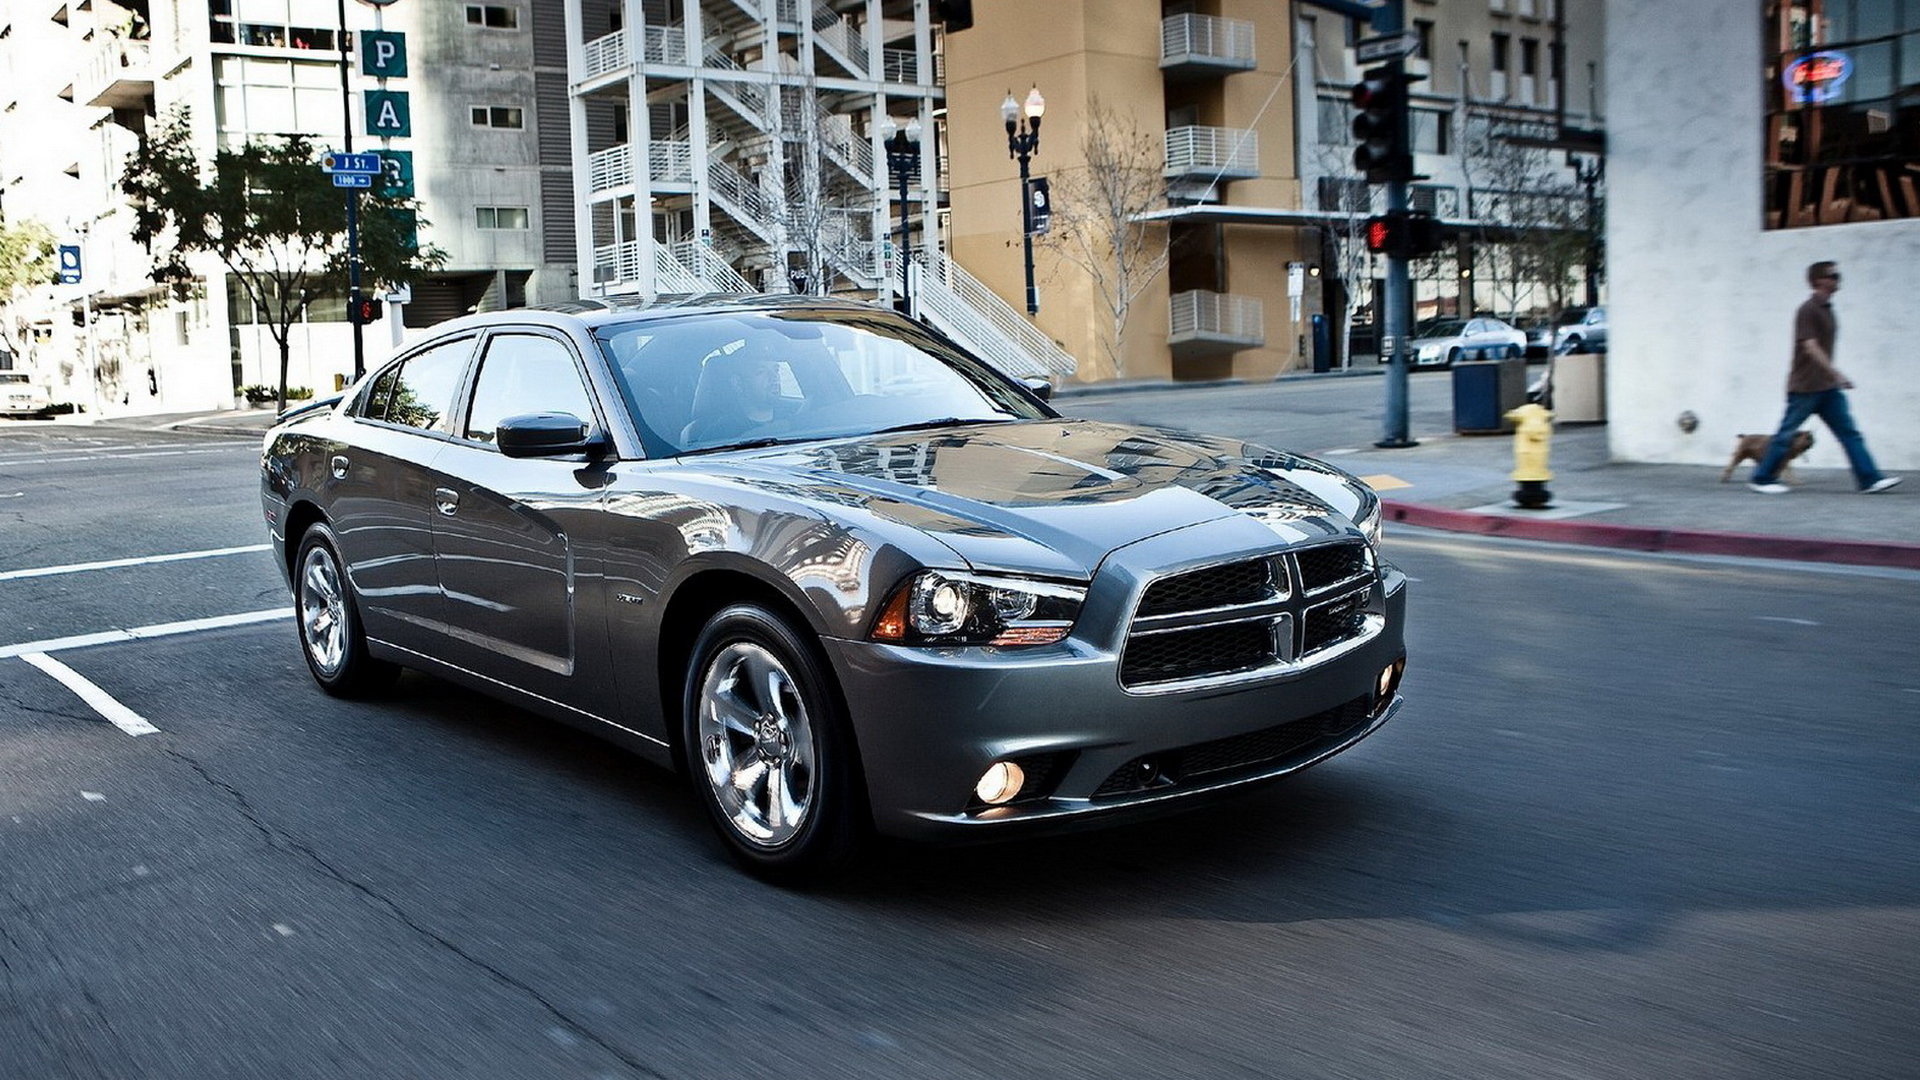 Dodge-Charger 2011